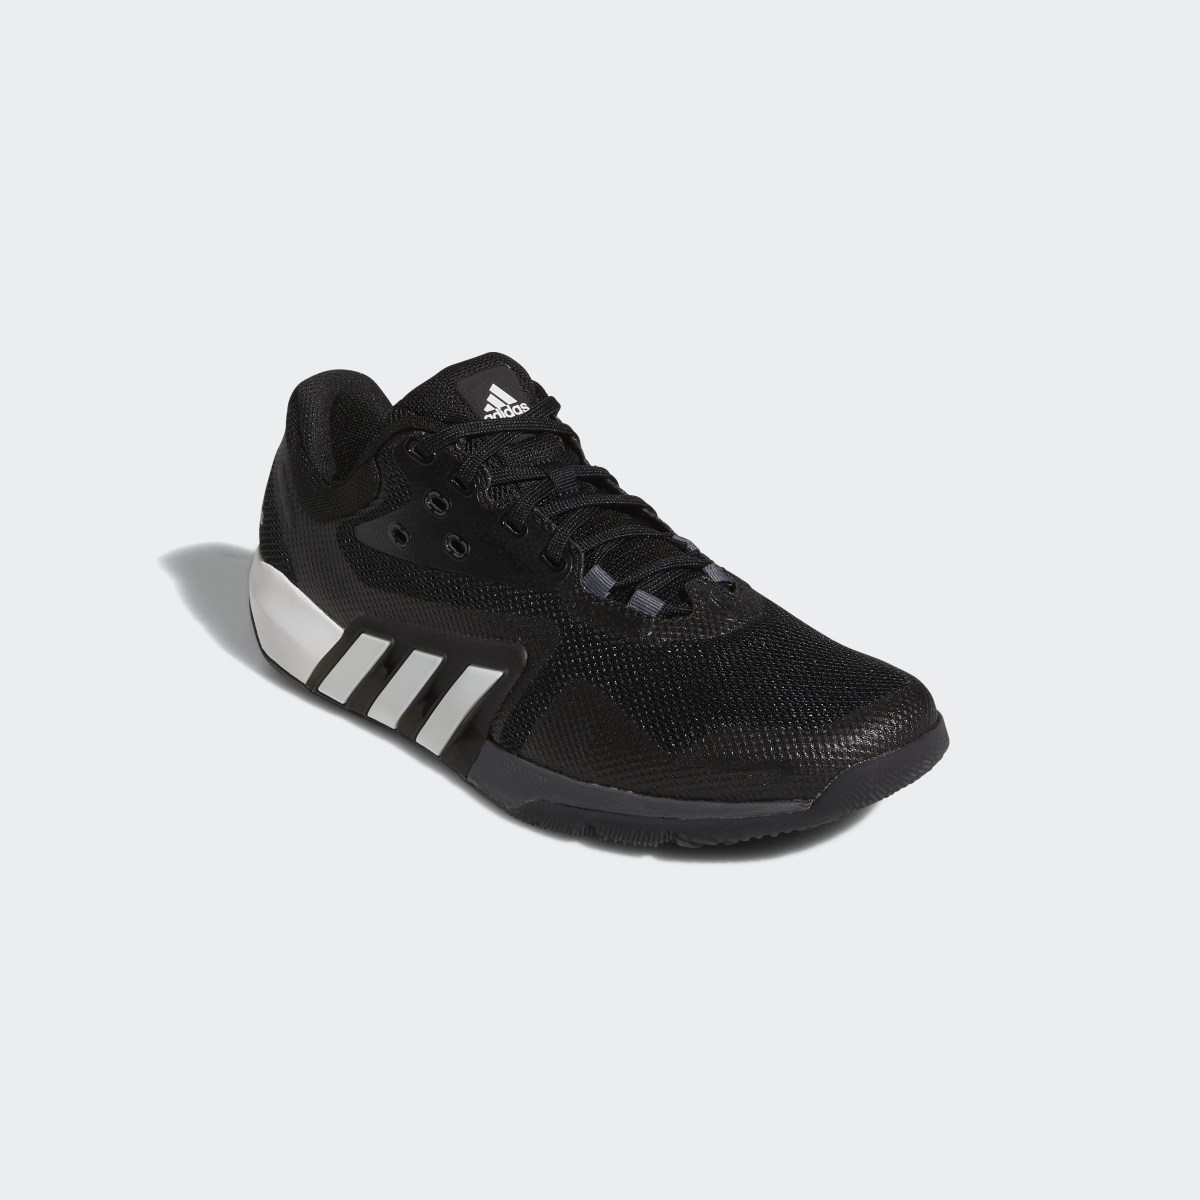 Adidas Dropset Trainers. 6